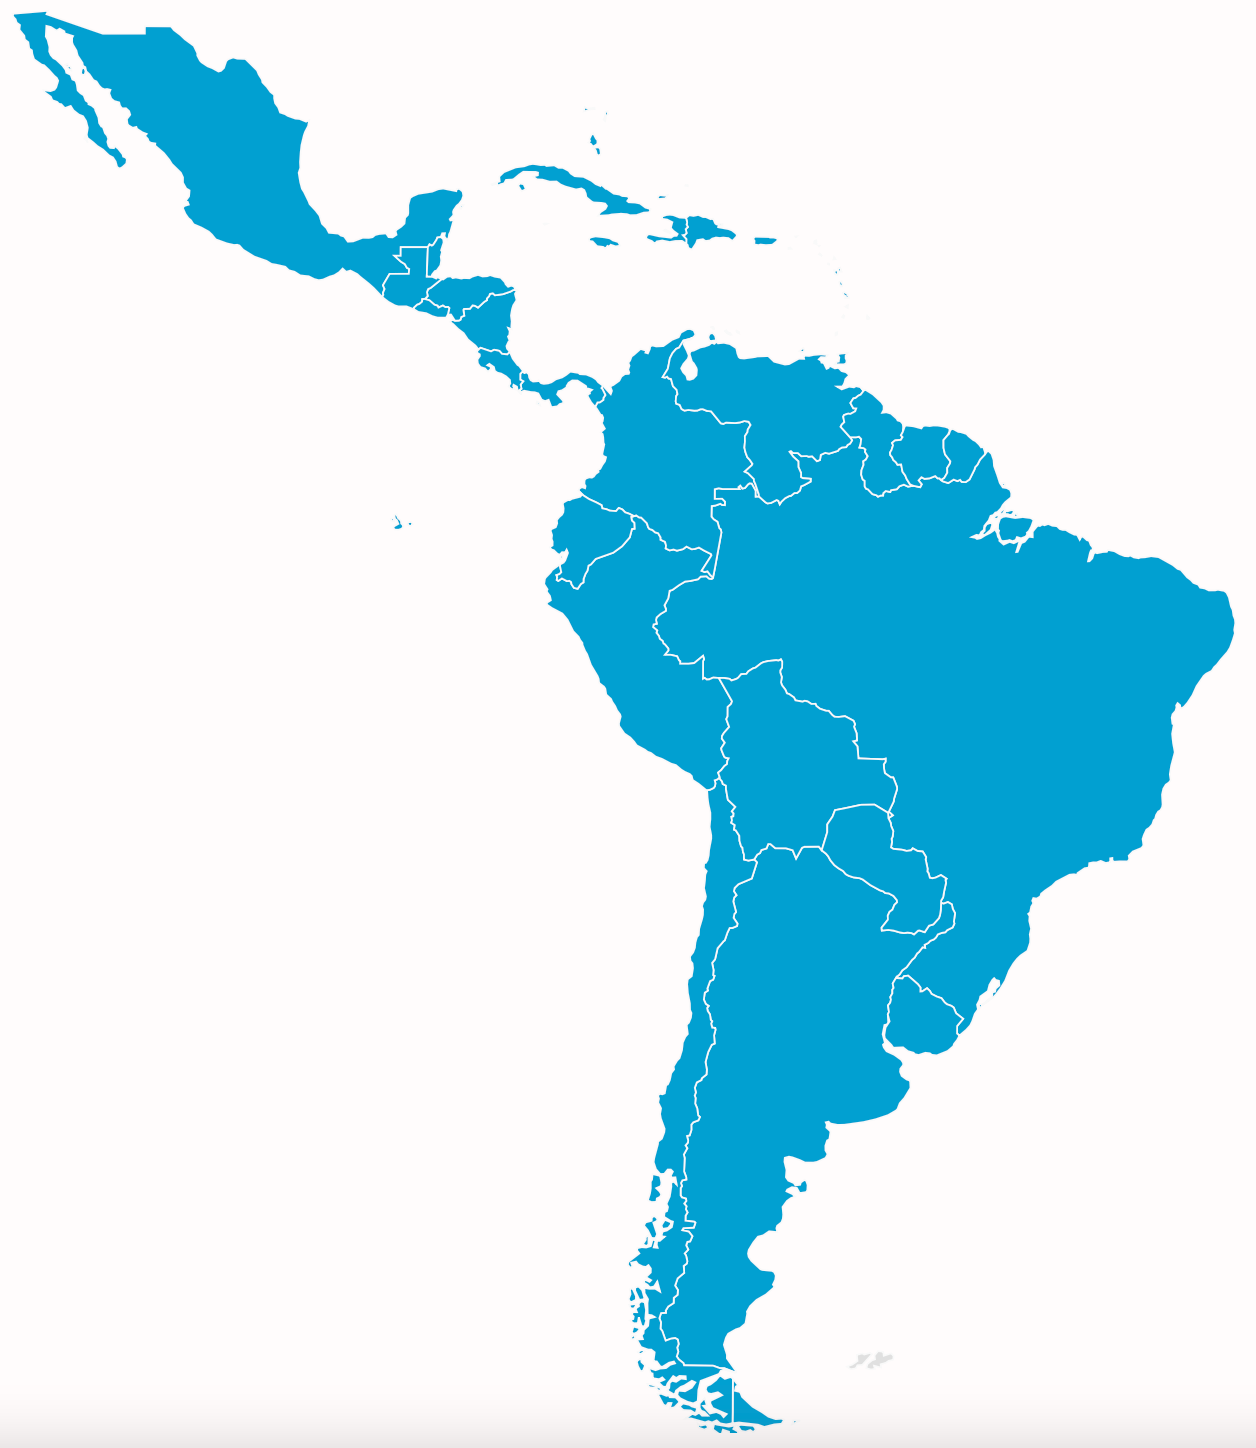 Students Publish Final Semester Updates to an Online Database Highlighting Impact of COVID-19 in Latin America and the Caribbean